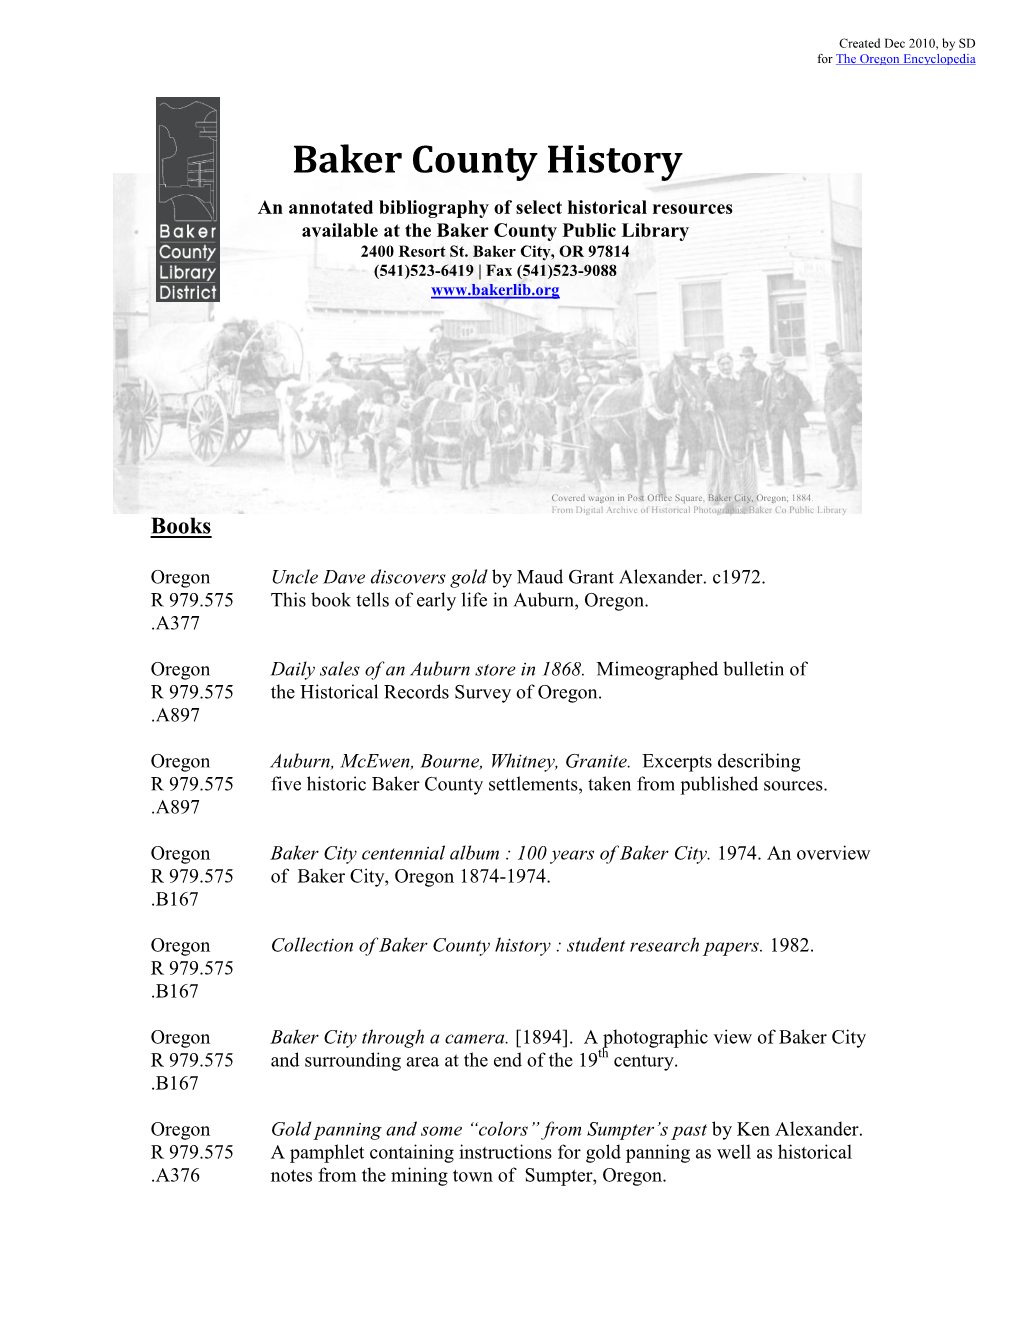 Baker County History an Annotated Bibliography of Select Historical Resources Available at the Baker County Public Library 2400 Resort St